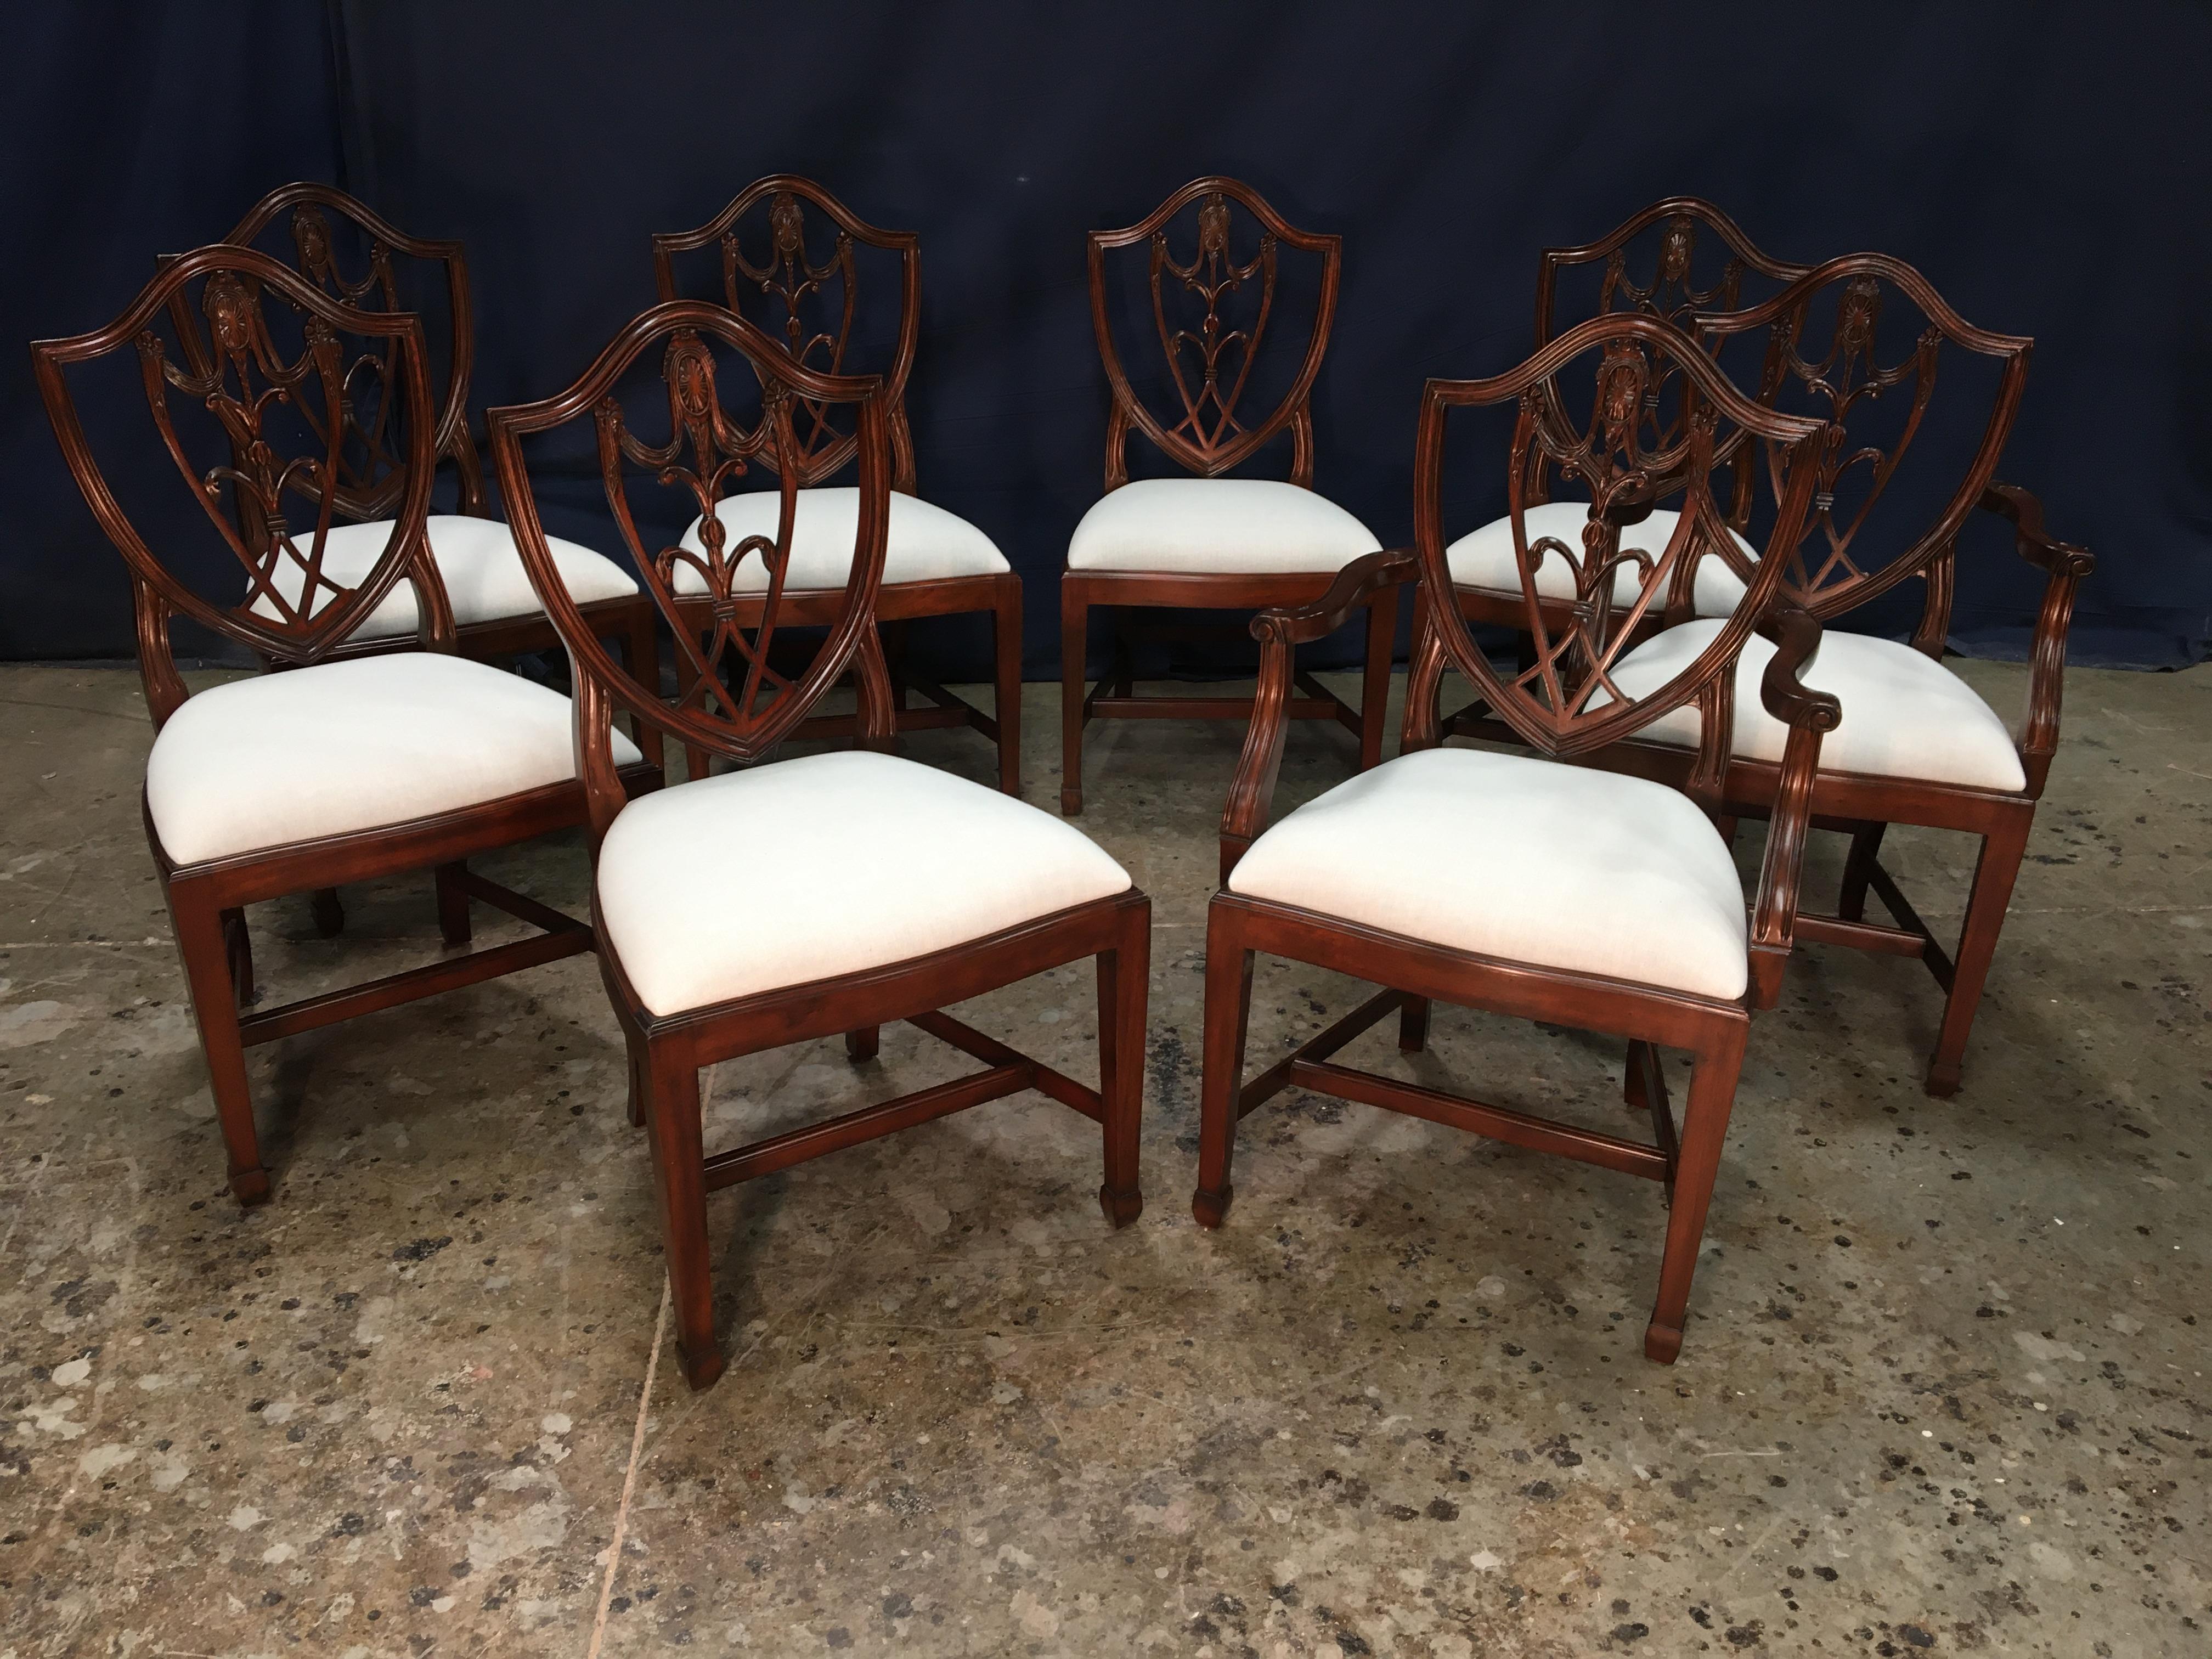 This is a set of eight (two arms and eight sides) mahogany Shieldback dining chairs by Leighton Hall. They feature the classic shieldback design with square tapered legs. They feature our standard medium brown mahogany color. The chairs come with a